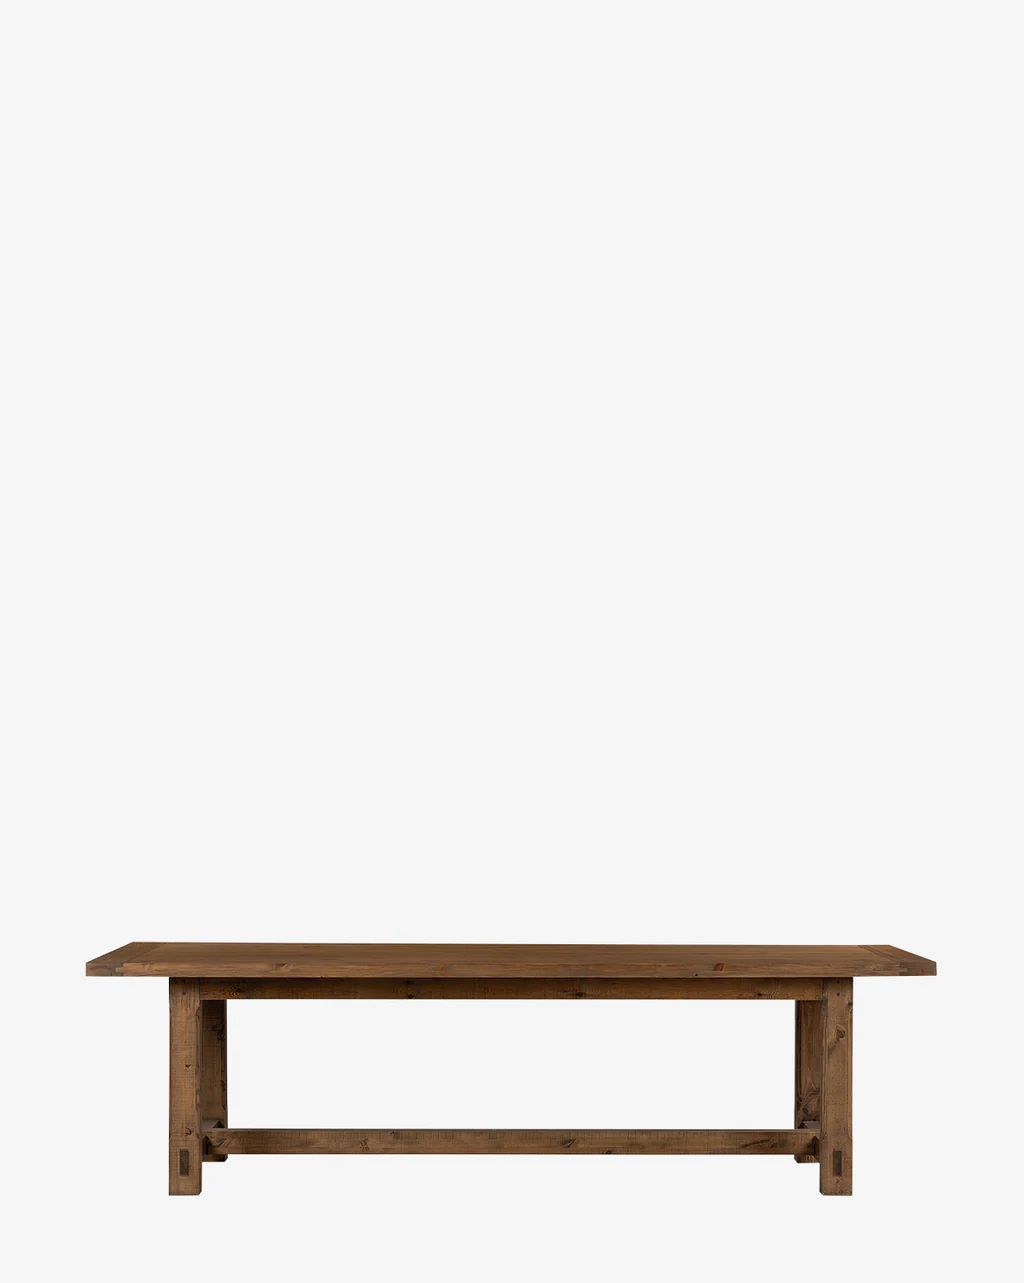 Tywin Dining Table | McGee & Co.